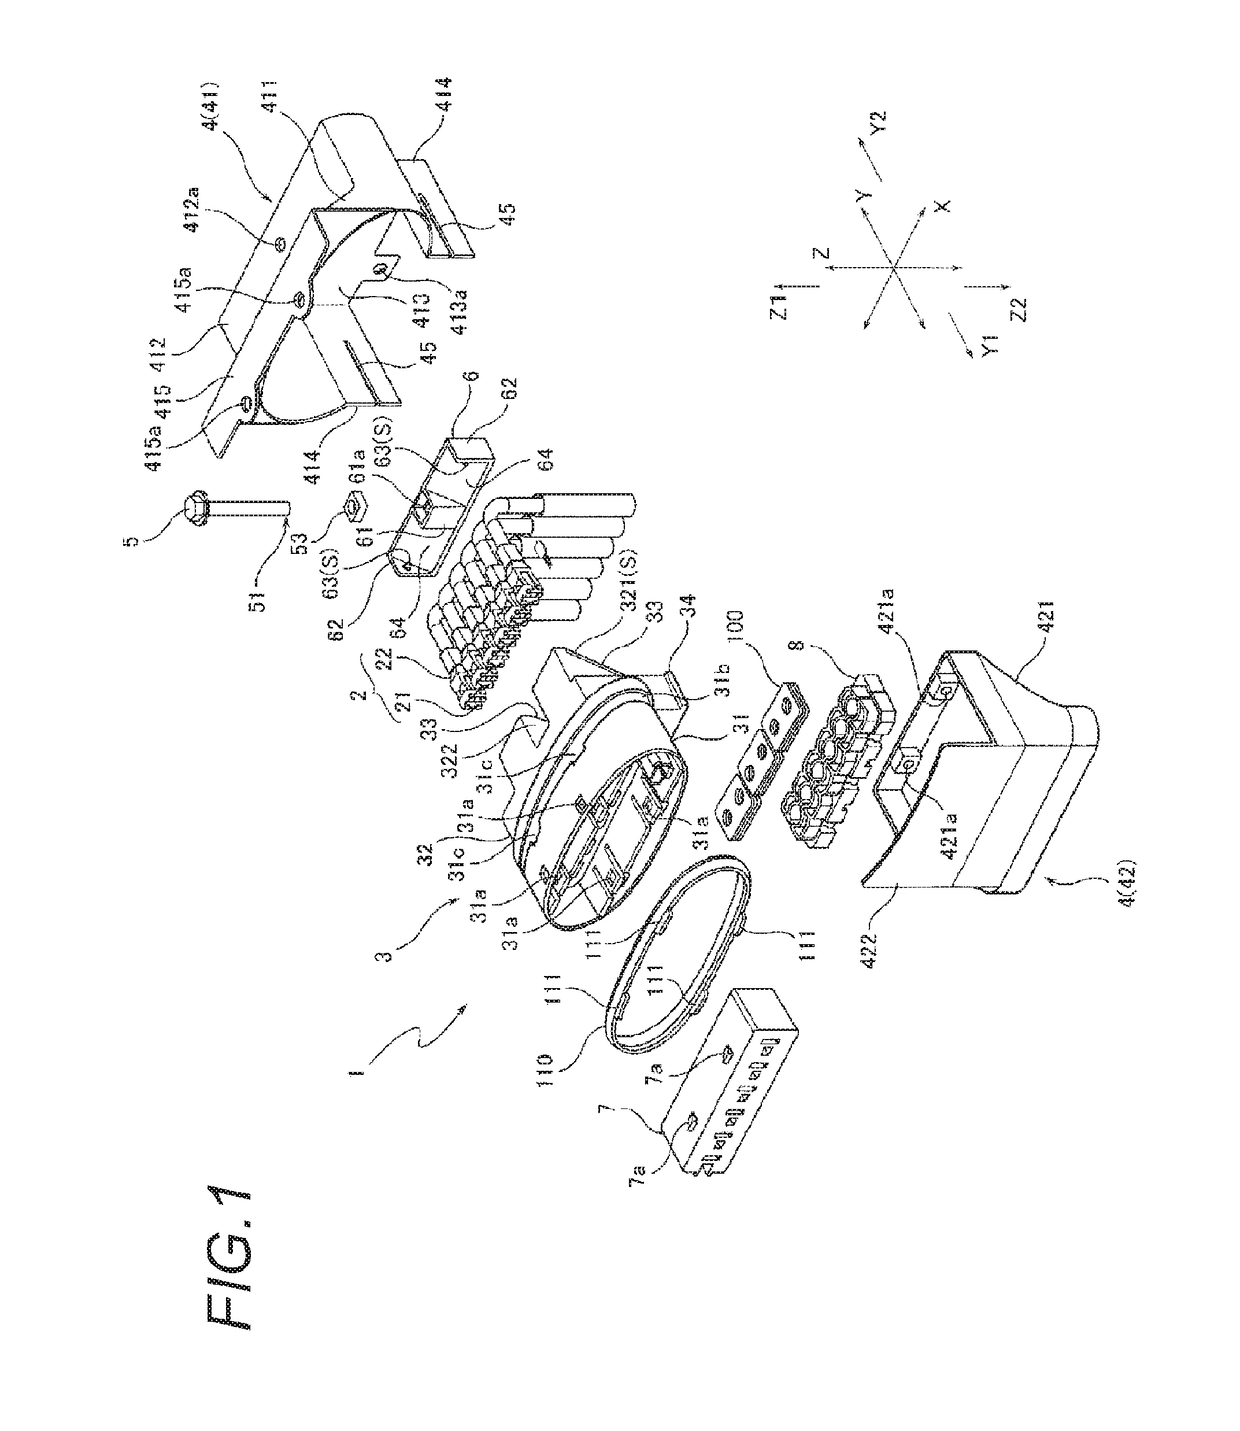 Connector including a plurality of connector terminals to contact an apparatus-terminal of a connection counterpart apparatus